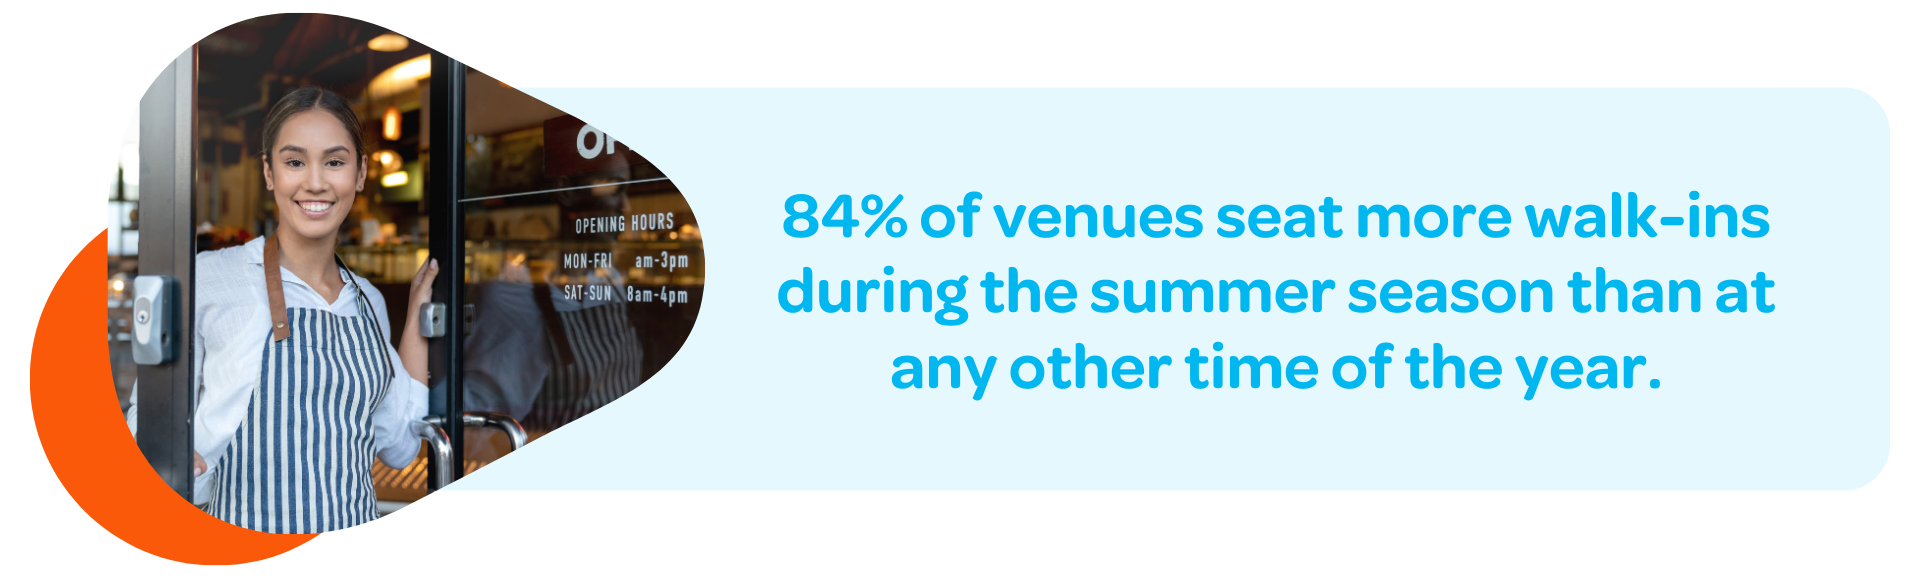 84% of venues seat more walk-ins  during the summer season than at any other time of the year